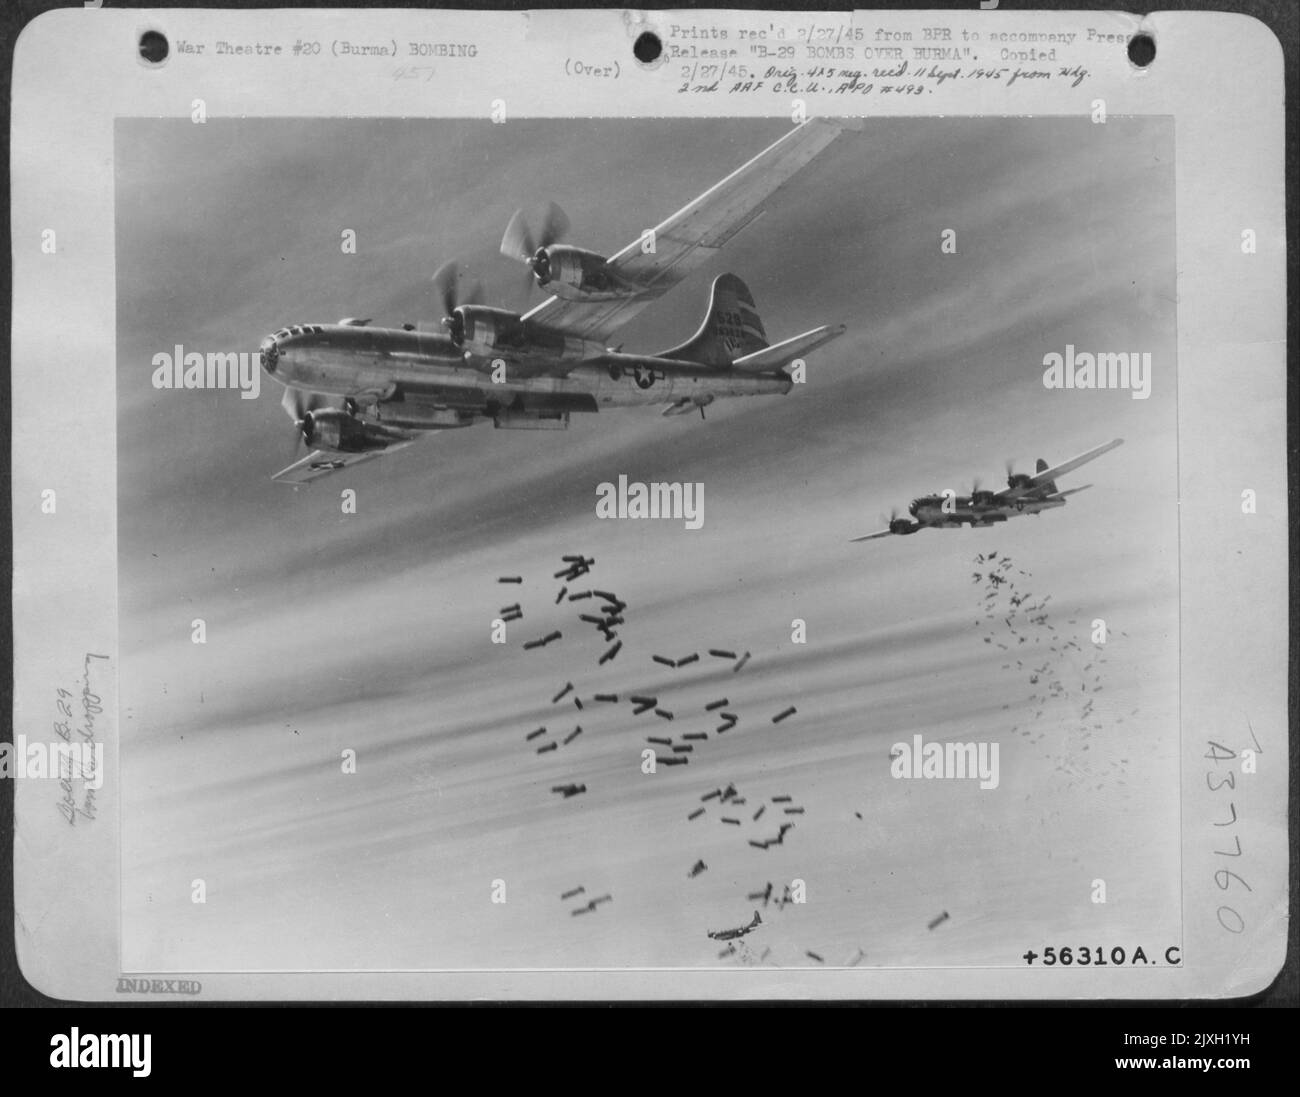 B-29 Bombs Over Burma (No.1) - Tons Of Bombs Speckle The Sky Over Rangoon, Burma, As They Spew From The Yawning Bomb Bays Of 20Th Bomber Command Superfortresses. The Target Of This Daylight Attack By Brig. Gen. Roger M. Ramsey'S India-Based Airman Was A Stock Photo